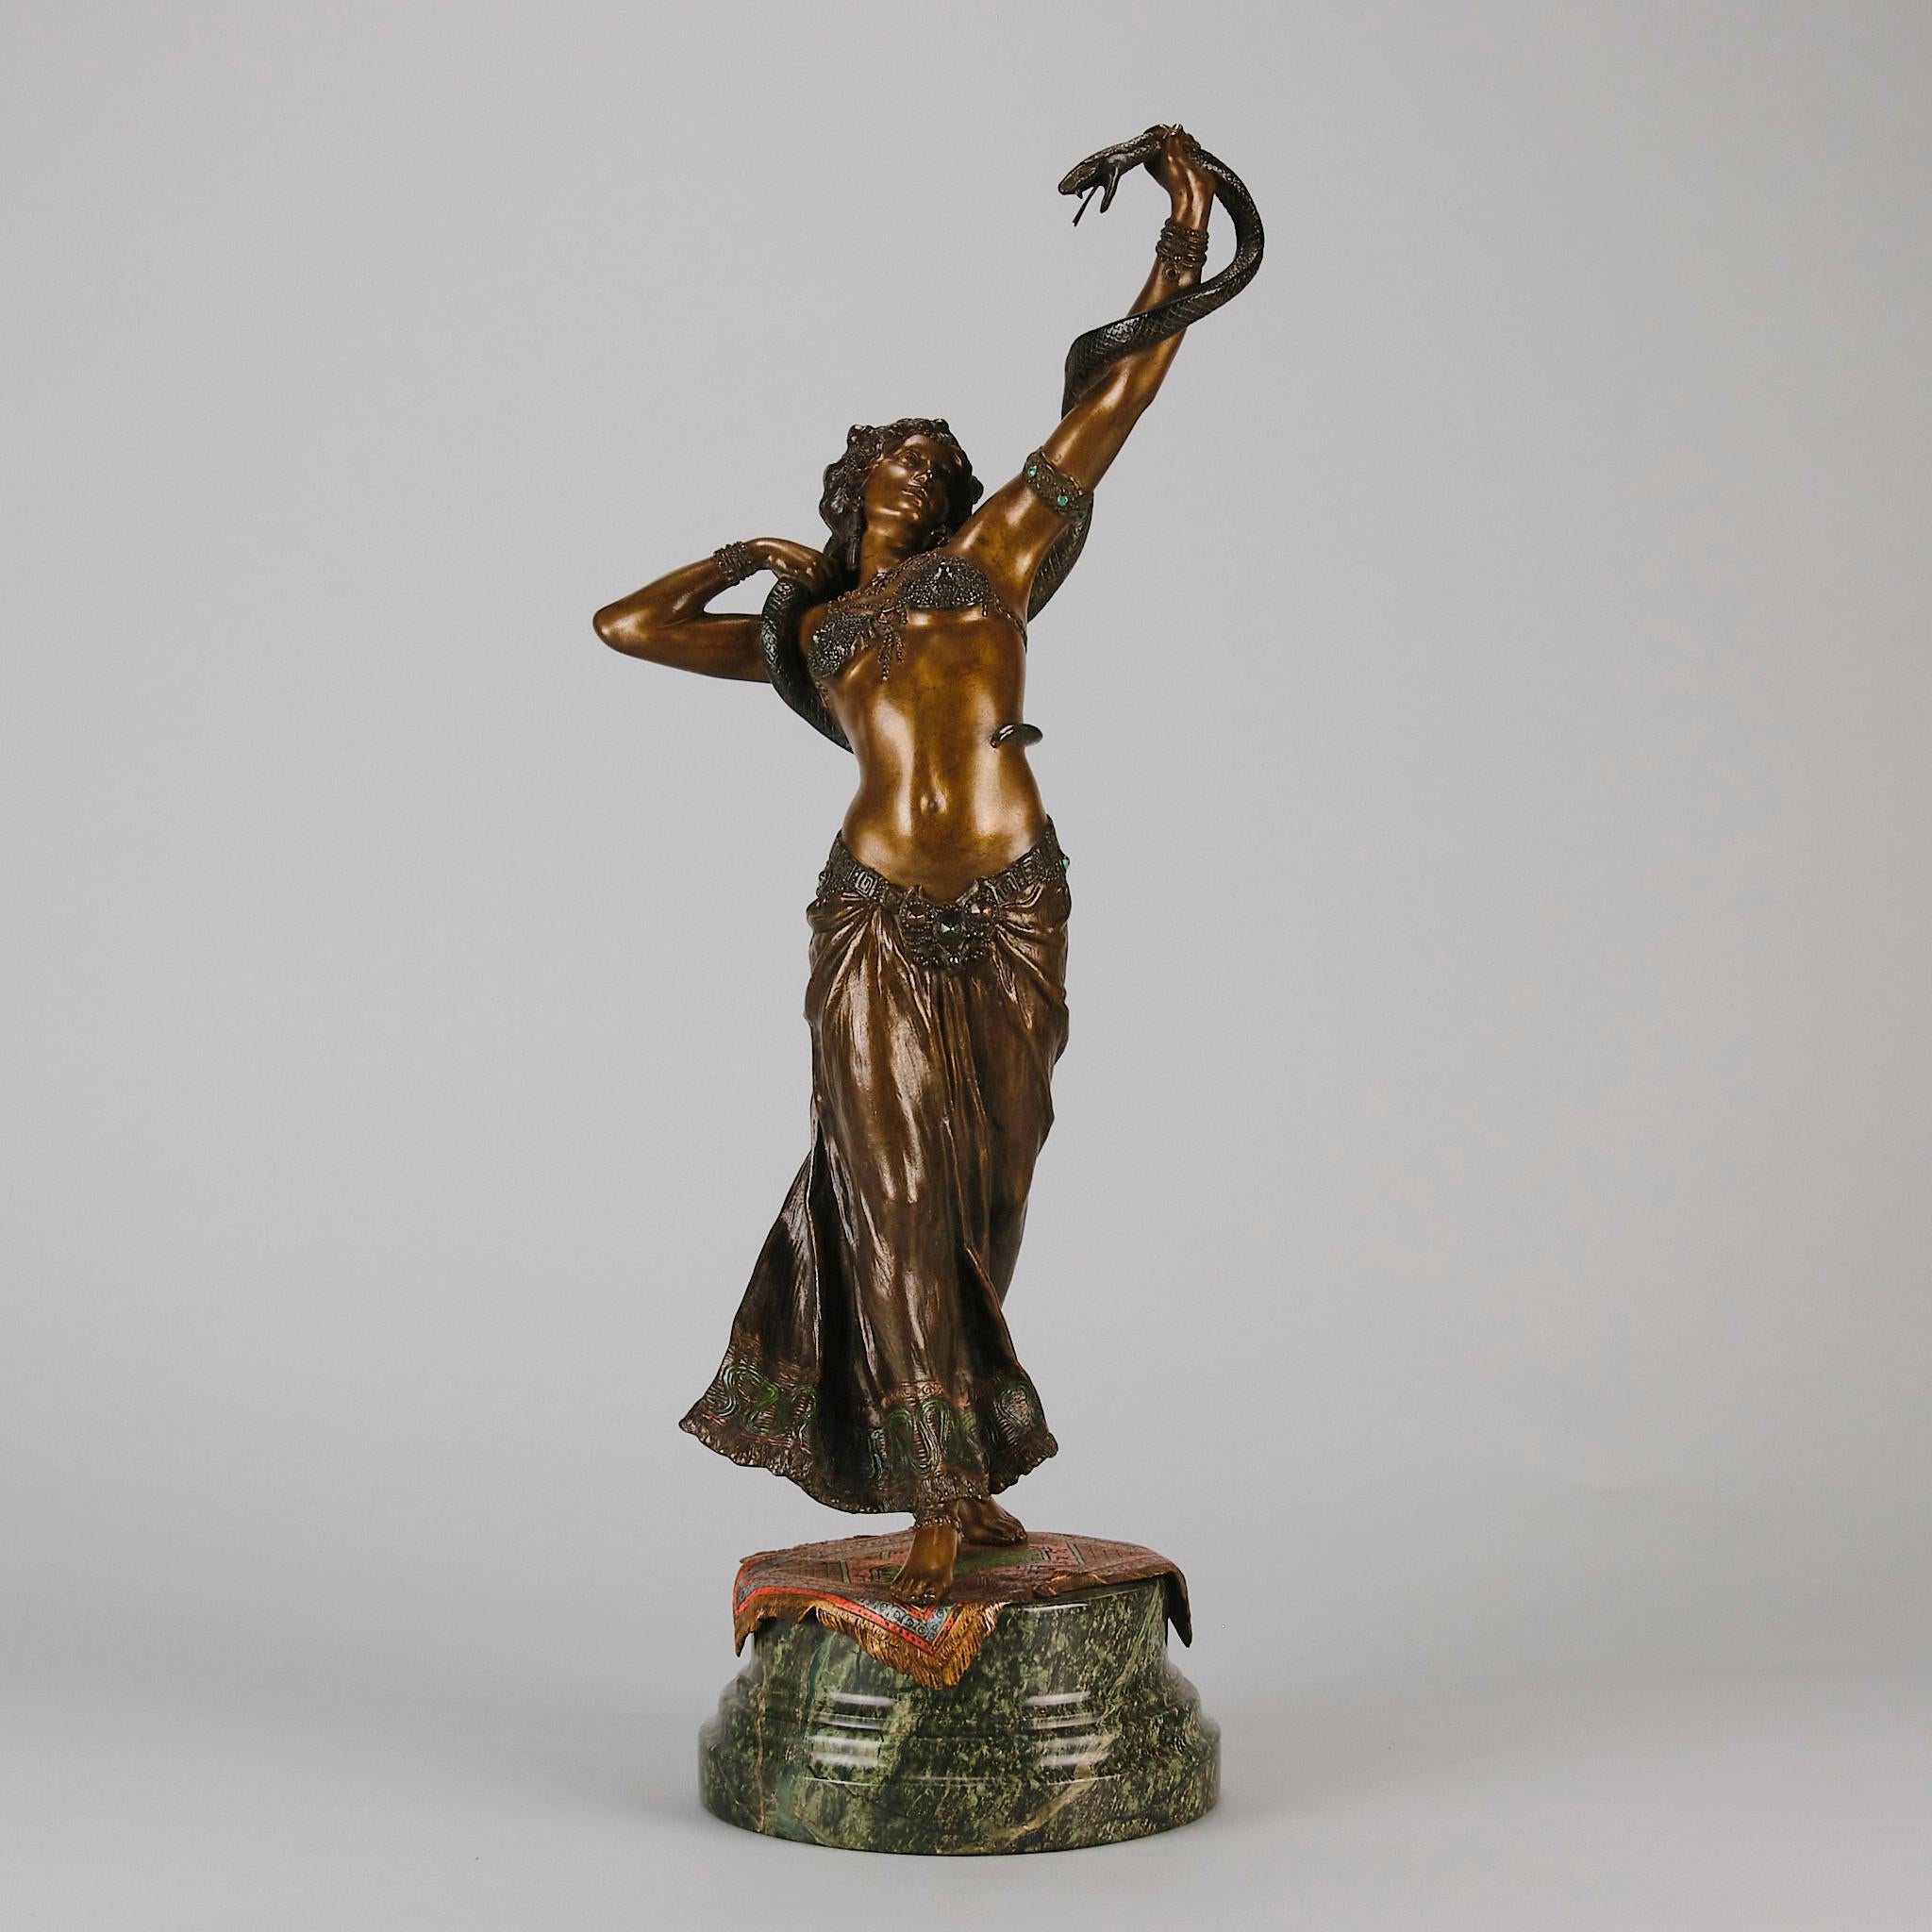 An excellent early 20th Century cold painted Austrian bronze of an orientalist dancer, holding a snake above her head. with very fine colour and fabulous hand finished surface detail. Signed with the Bergman ‘B’ in an amphora vase and marked